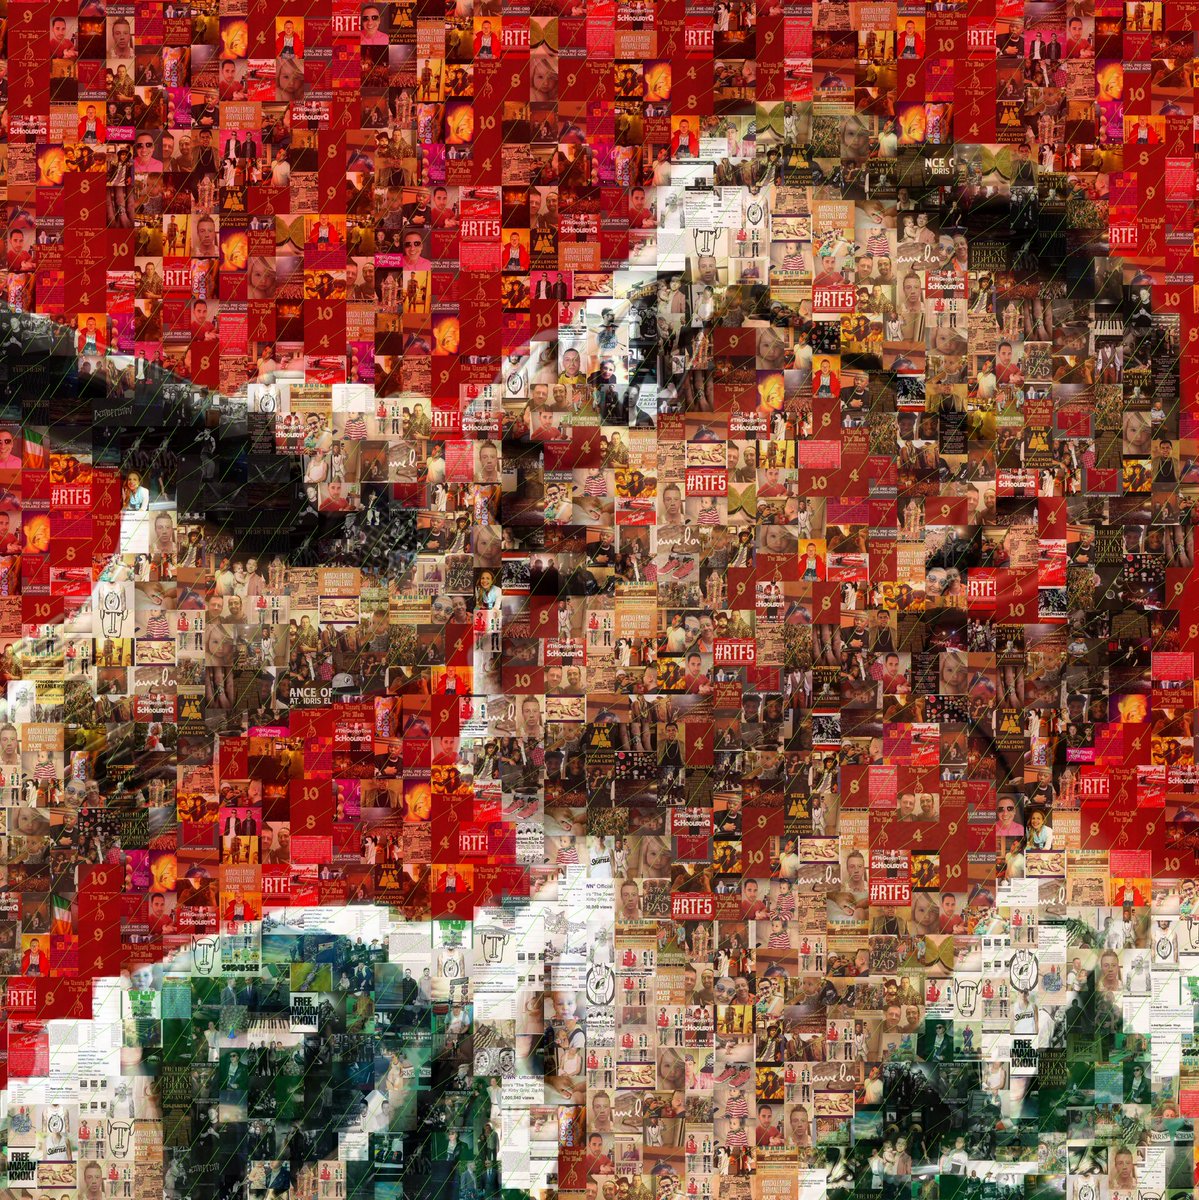 RT @mgorniak78: My project. Over a thousand photos related to @macklemore https://t.co/2zI682iqEA